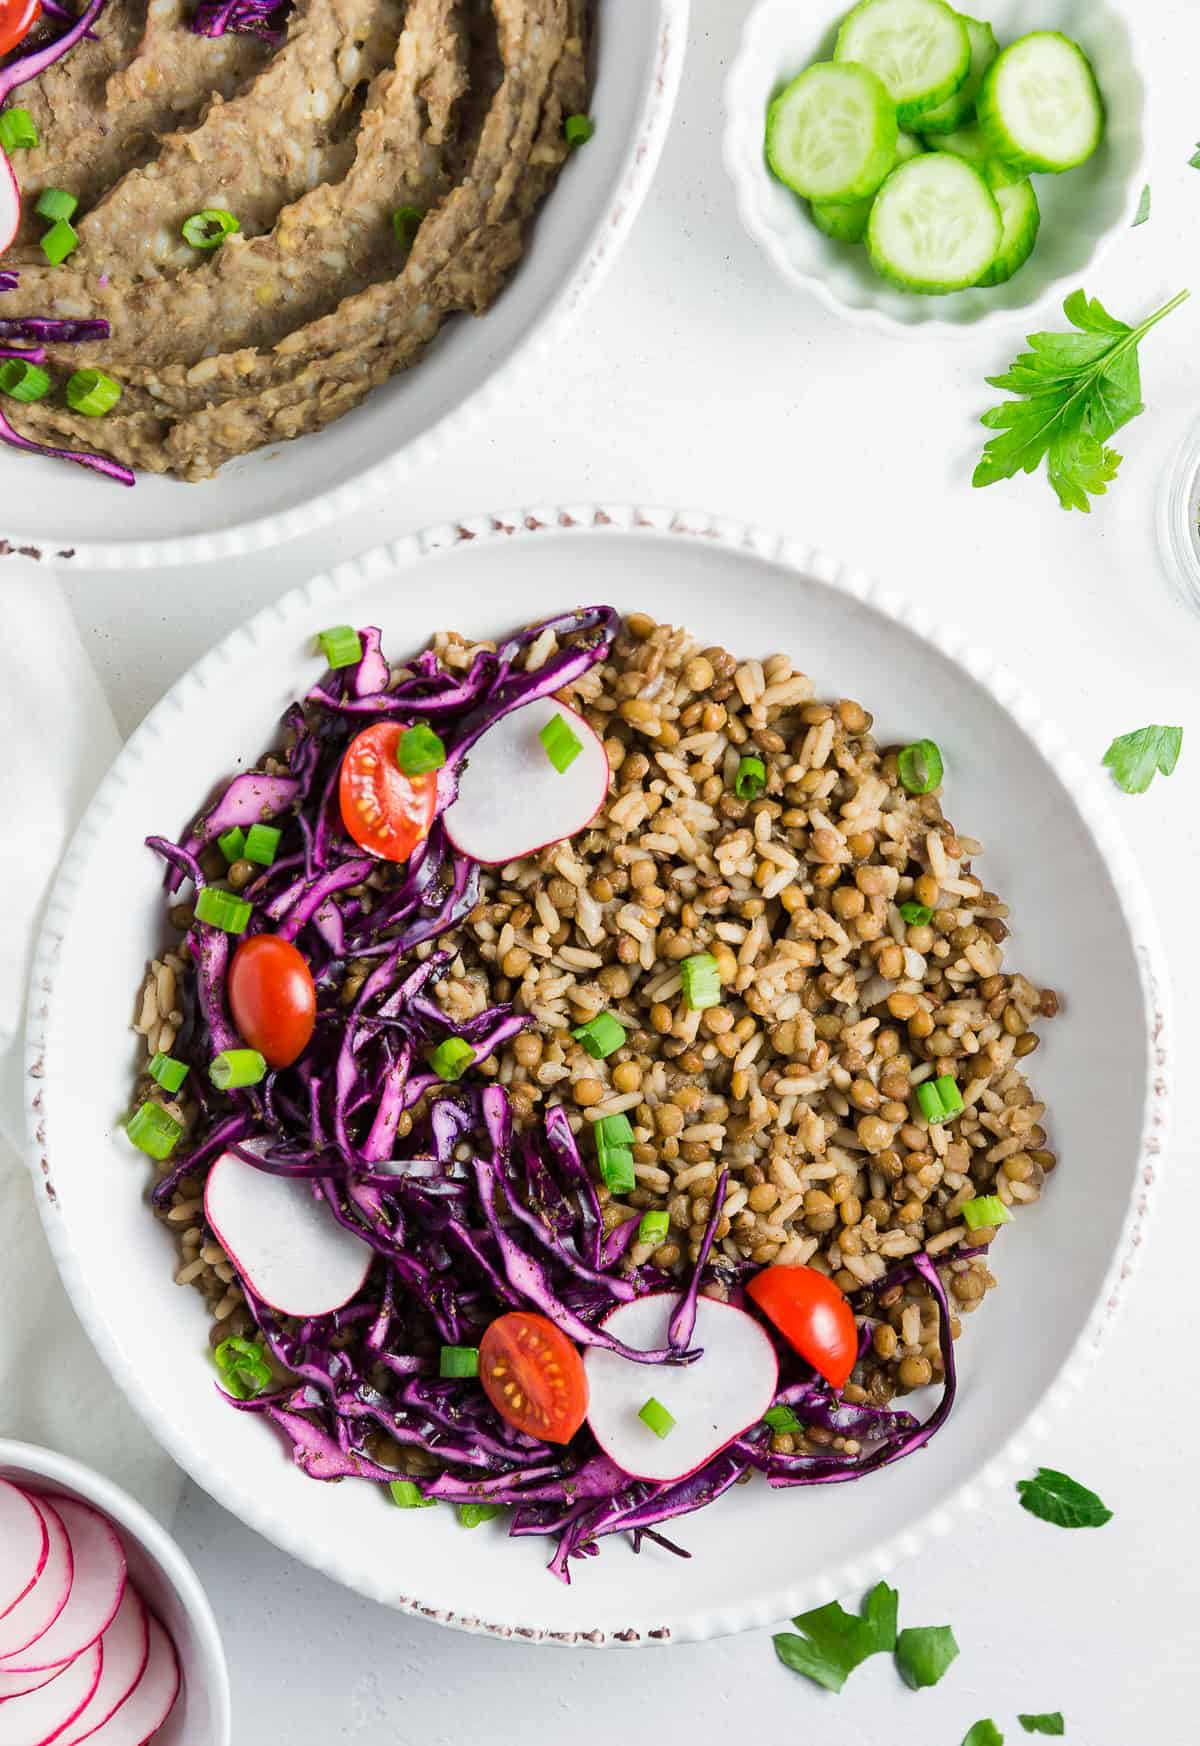 Mjedra Lebanese Lentils and Rice, plant based, vegan, vegetarian, whole food plant based, gluten free, recipe, wfpb, healthy, healthy vegan, oil free, no refined sugar, no oil, refined sugar free, dairy free, dinner party, entertaining, dinner